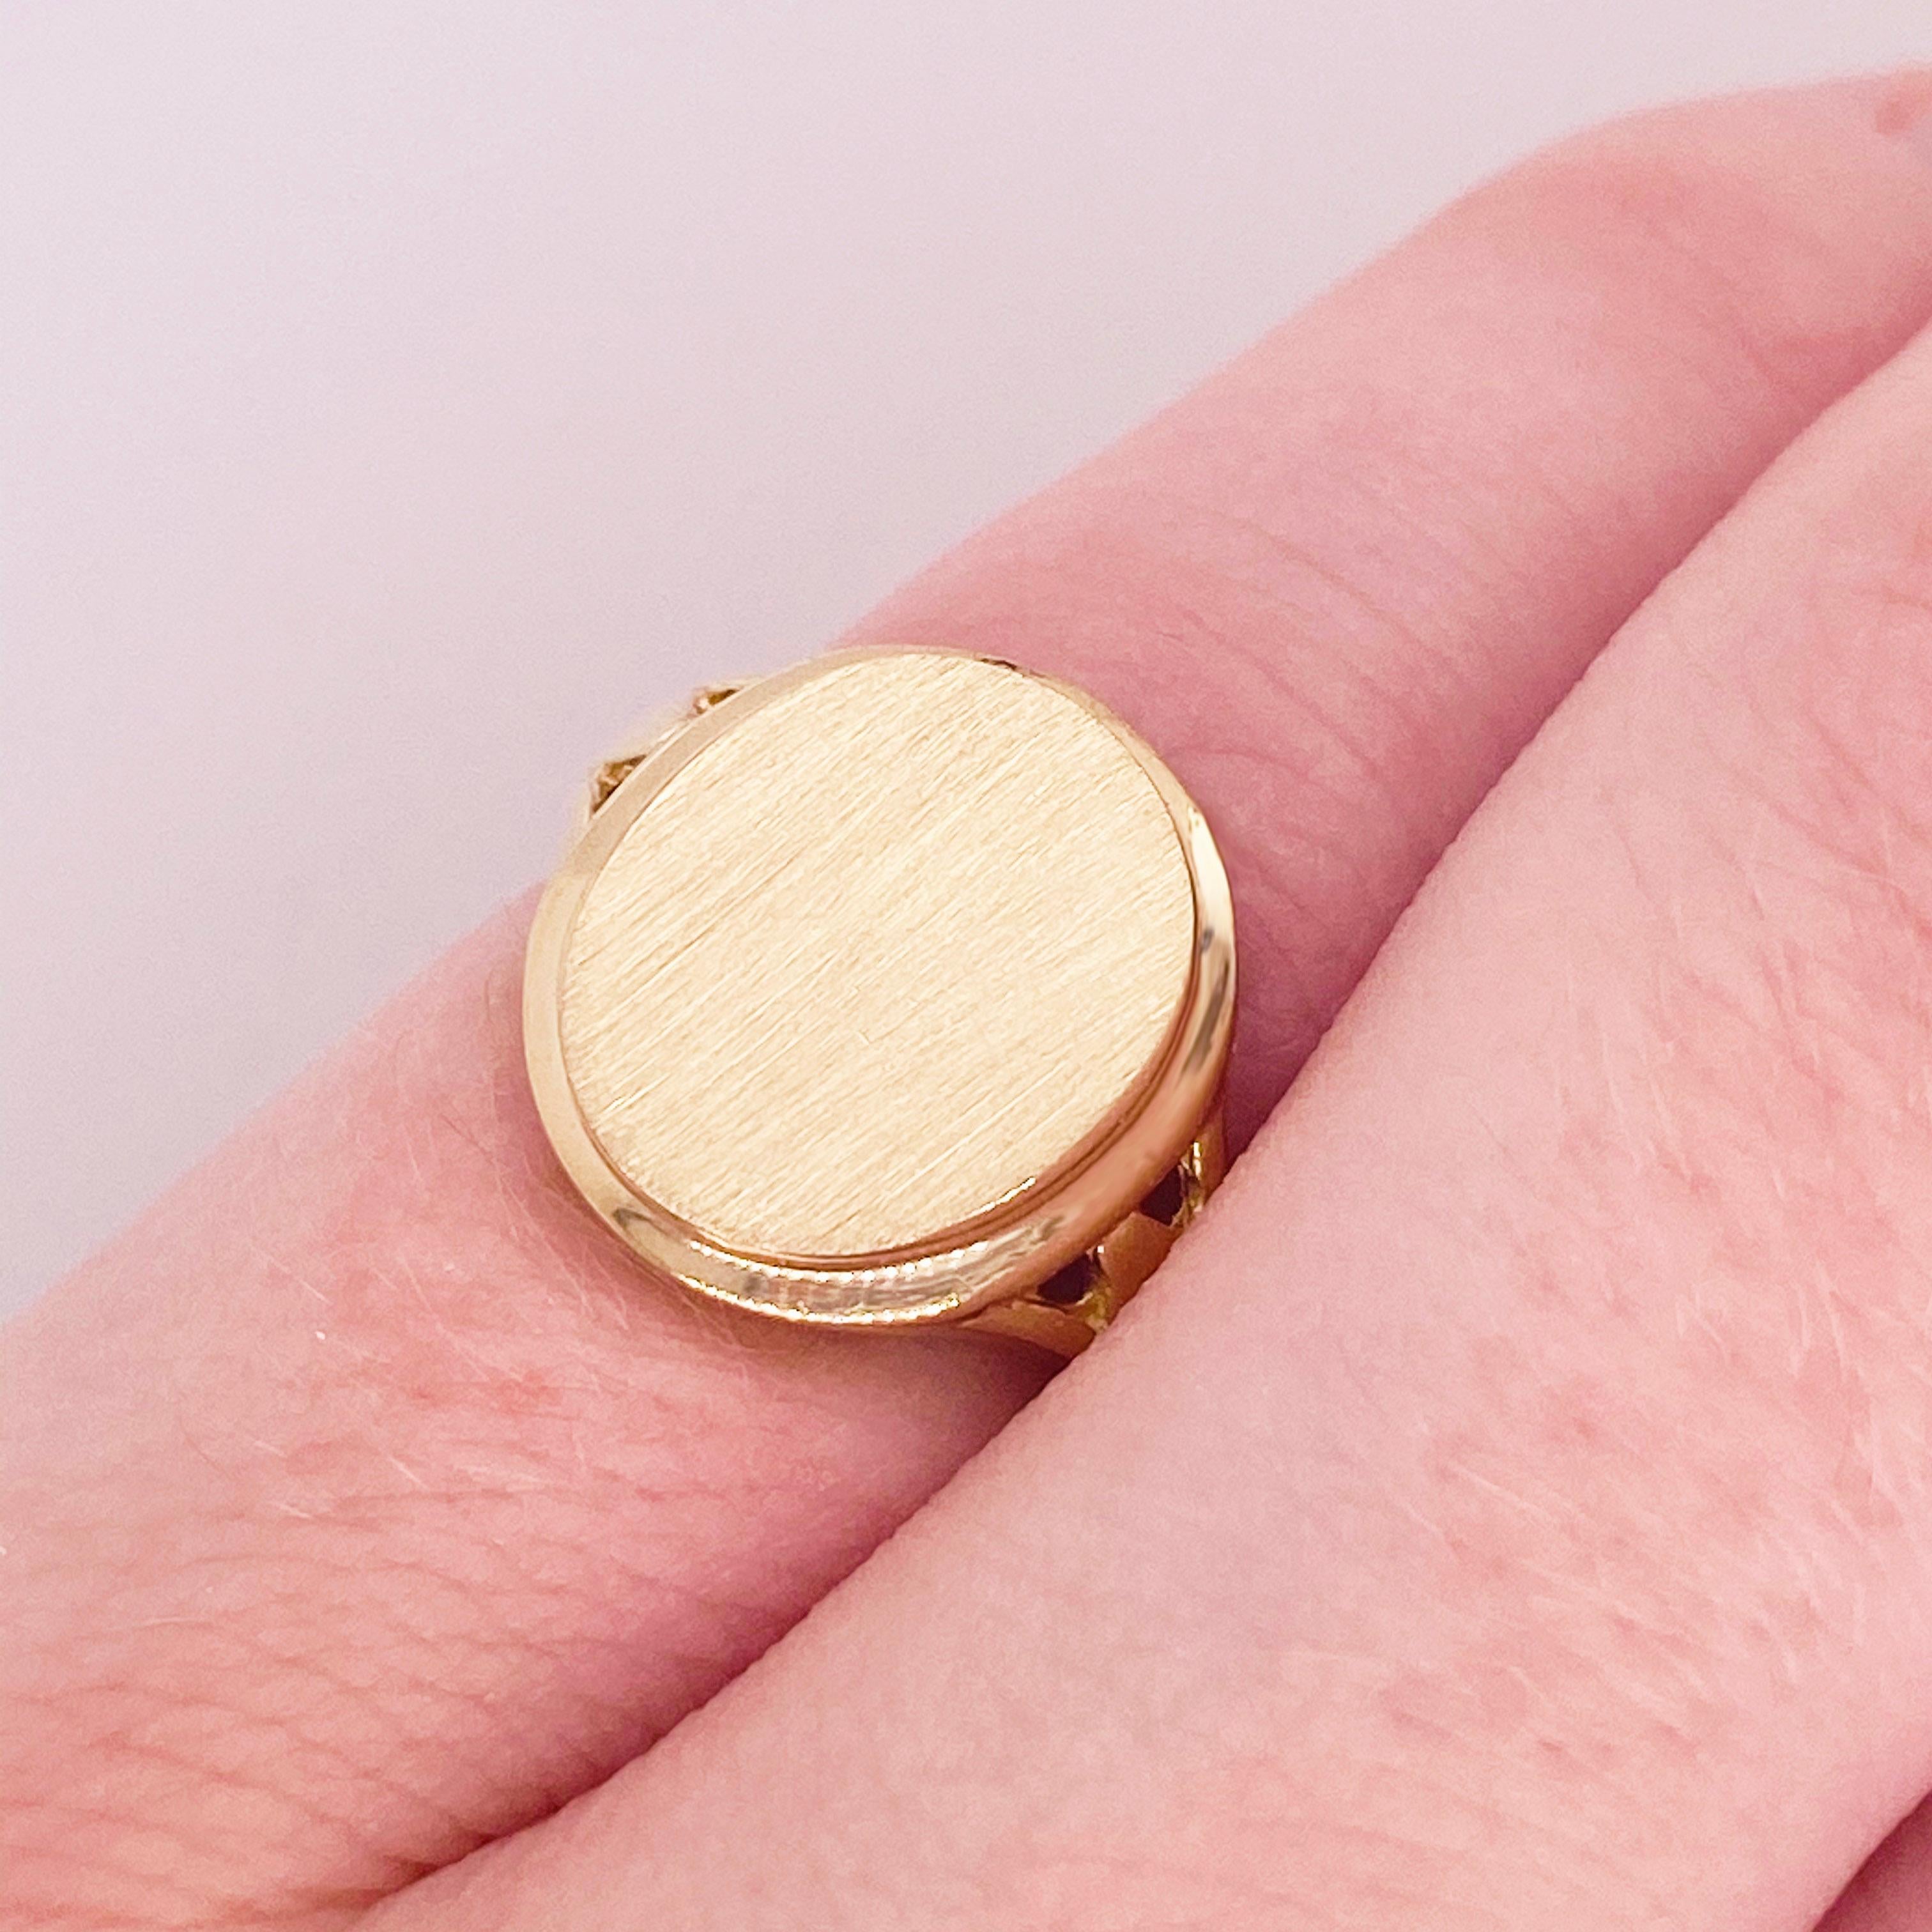 This pinkie ring is oh so cute and clever!  Designed to be on your pinkie, you can have it engraved with initials, your monogram, the perfect name, or flush-set a favorite gemstone in it!  This signet ring is solid 14k Yellow Gold and made in a well